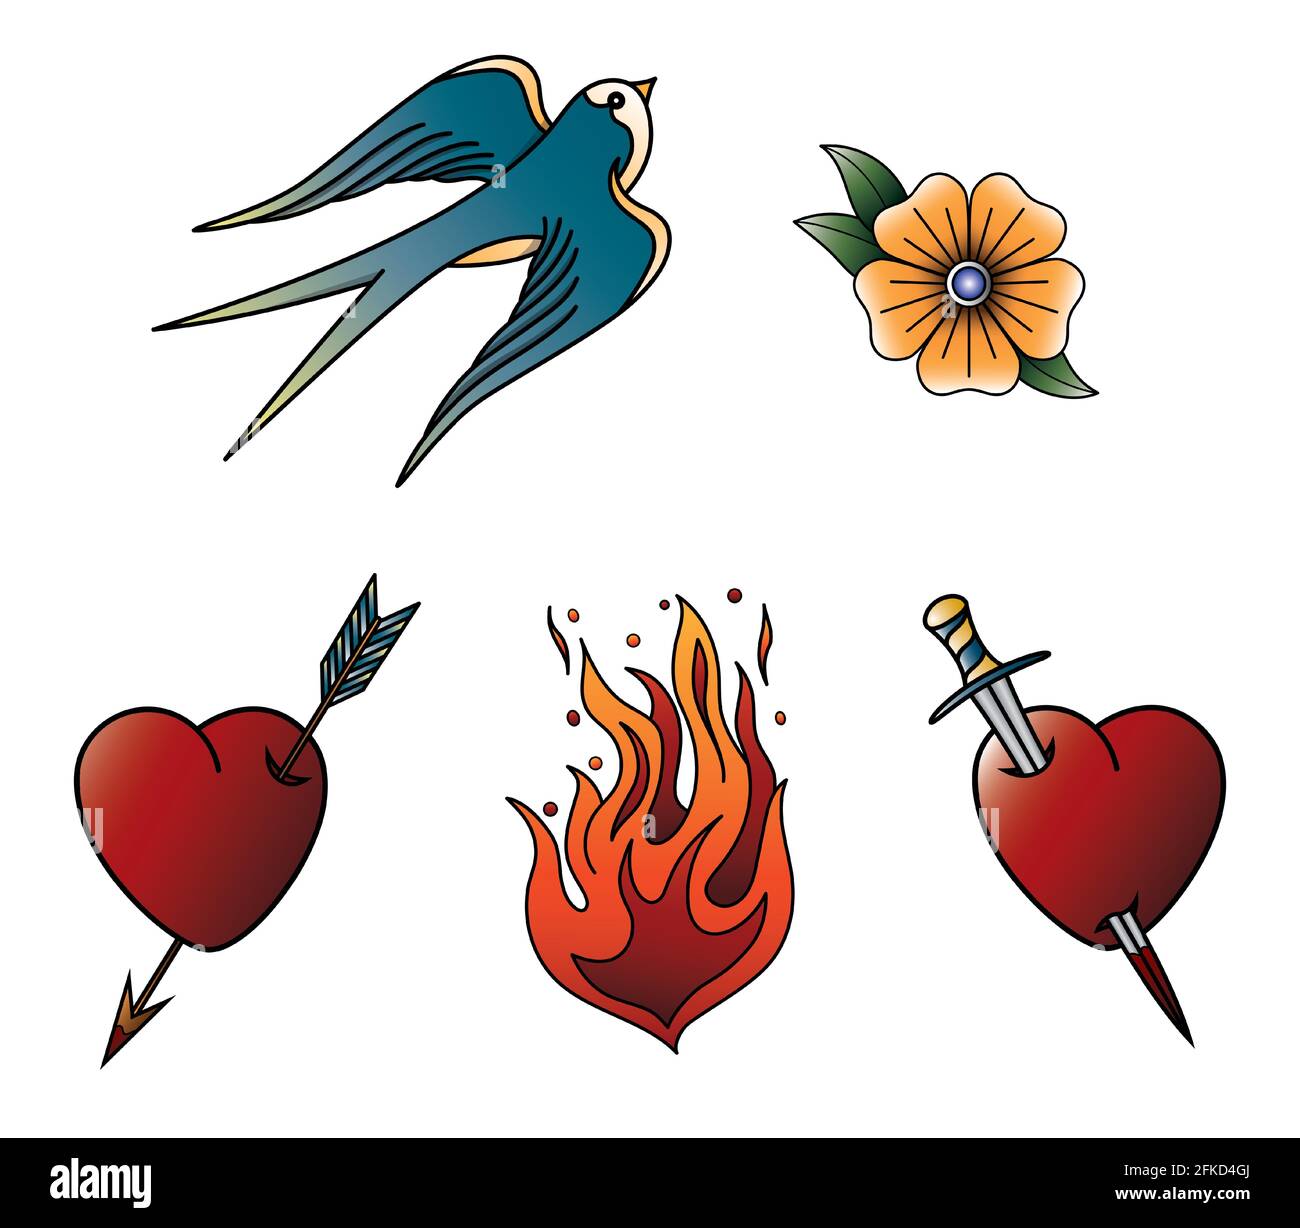 Tattoo Flaming Heart Pierced By Gold Arrow Sizzling Love Red Burning Heart  Passionate Heart Oldschool Styled Tattoo Stock Illustration - Download  Image Now - iStock